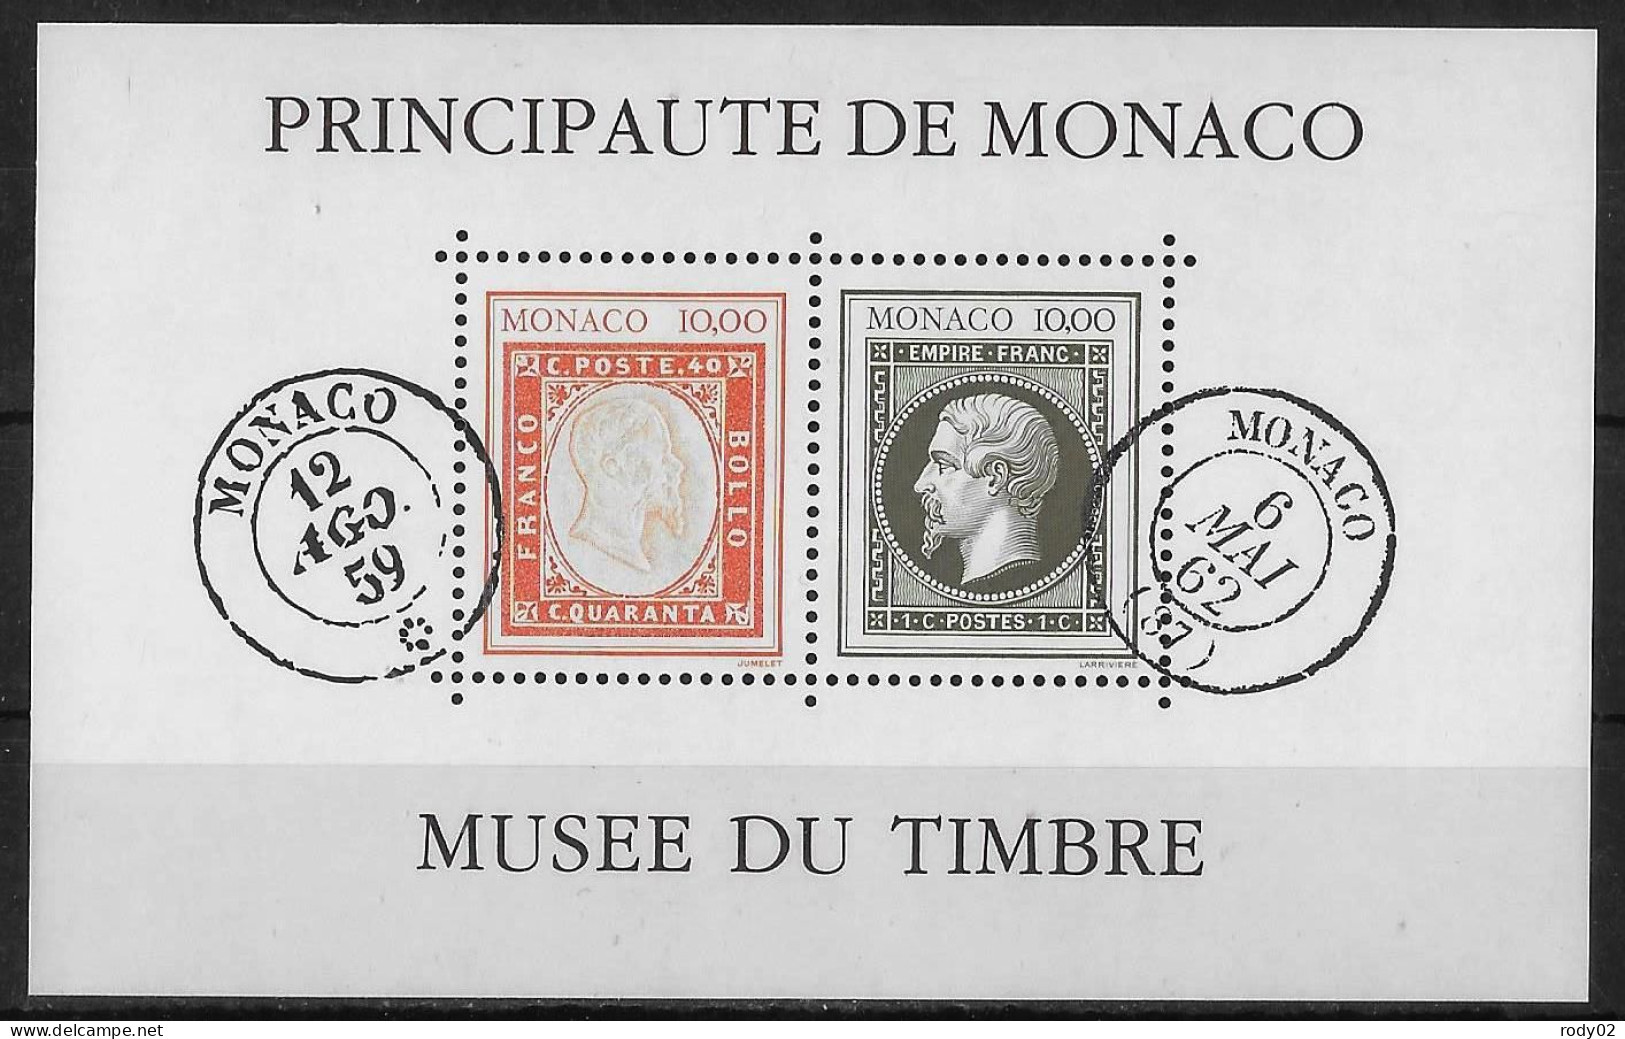 MONACO - ANNEE 1992 - CREATION DU MUSEE DU TIMBRE-POSTE - BF 58 - NEUF** MNH - Blocs